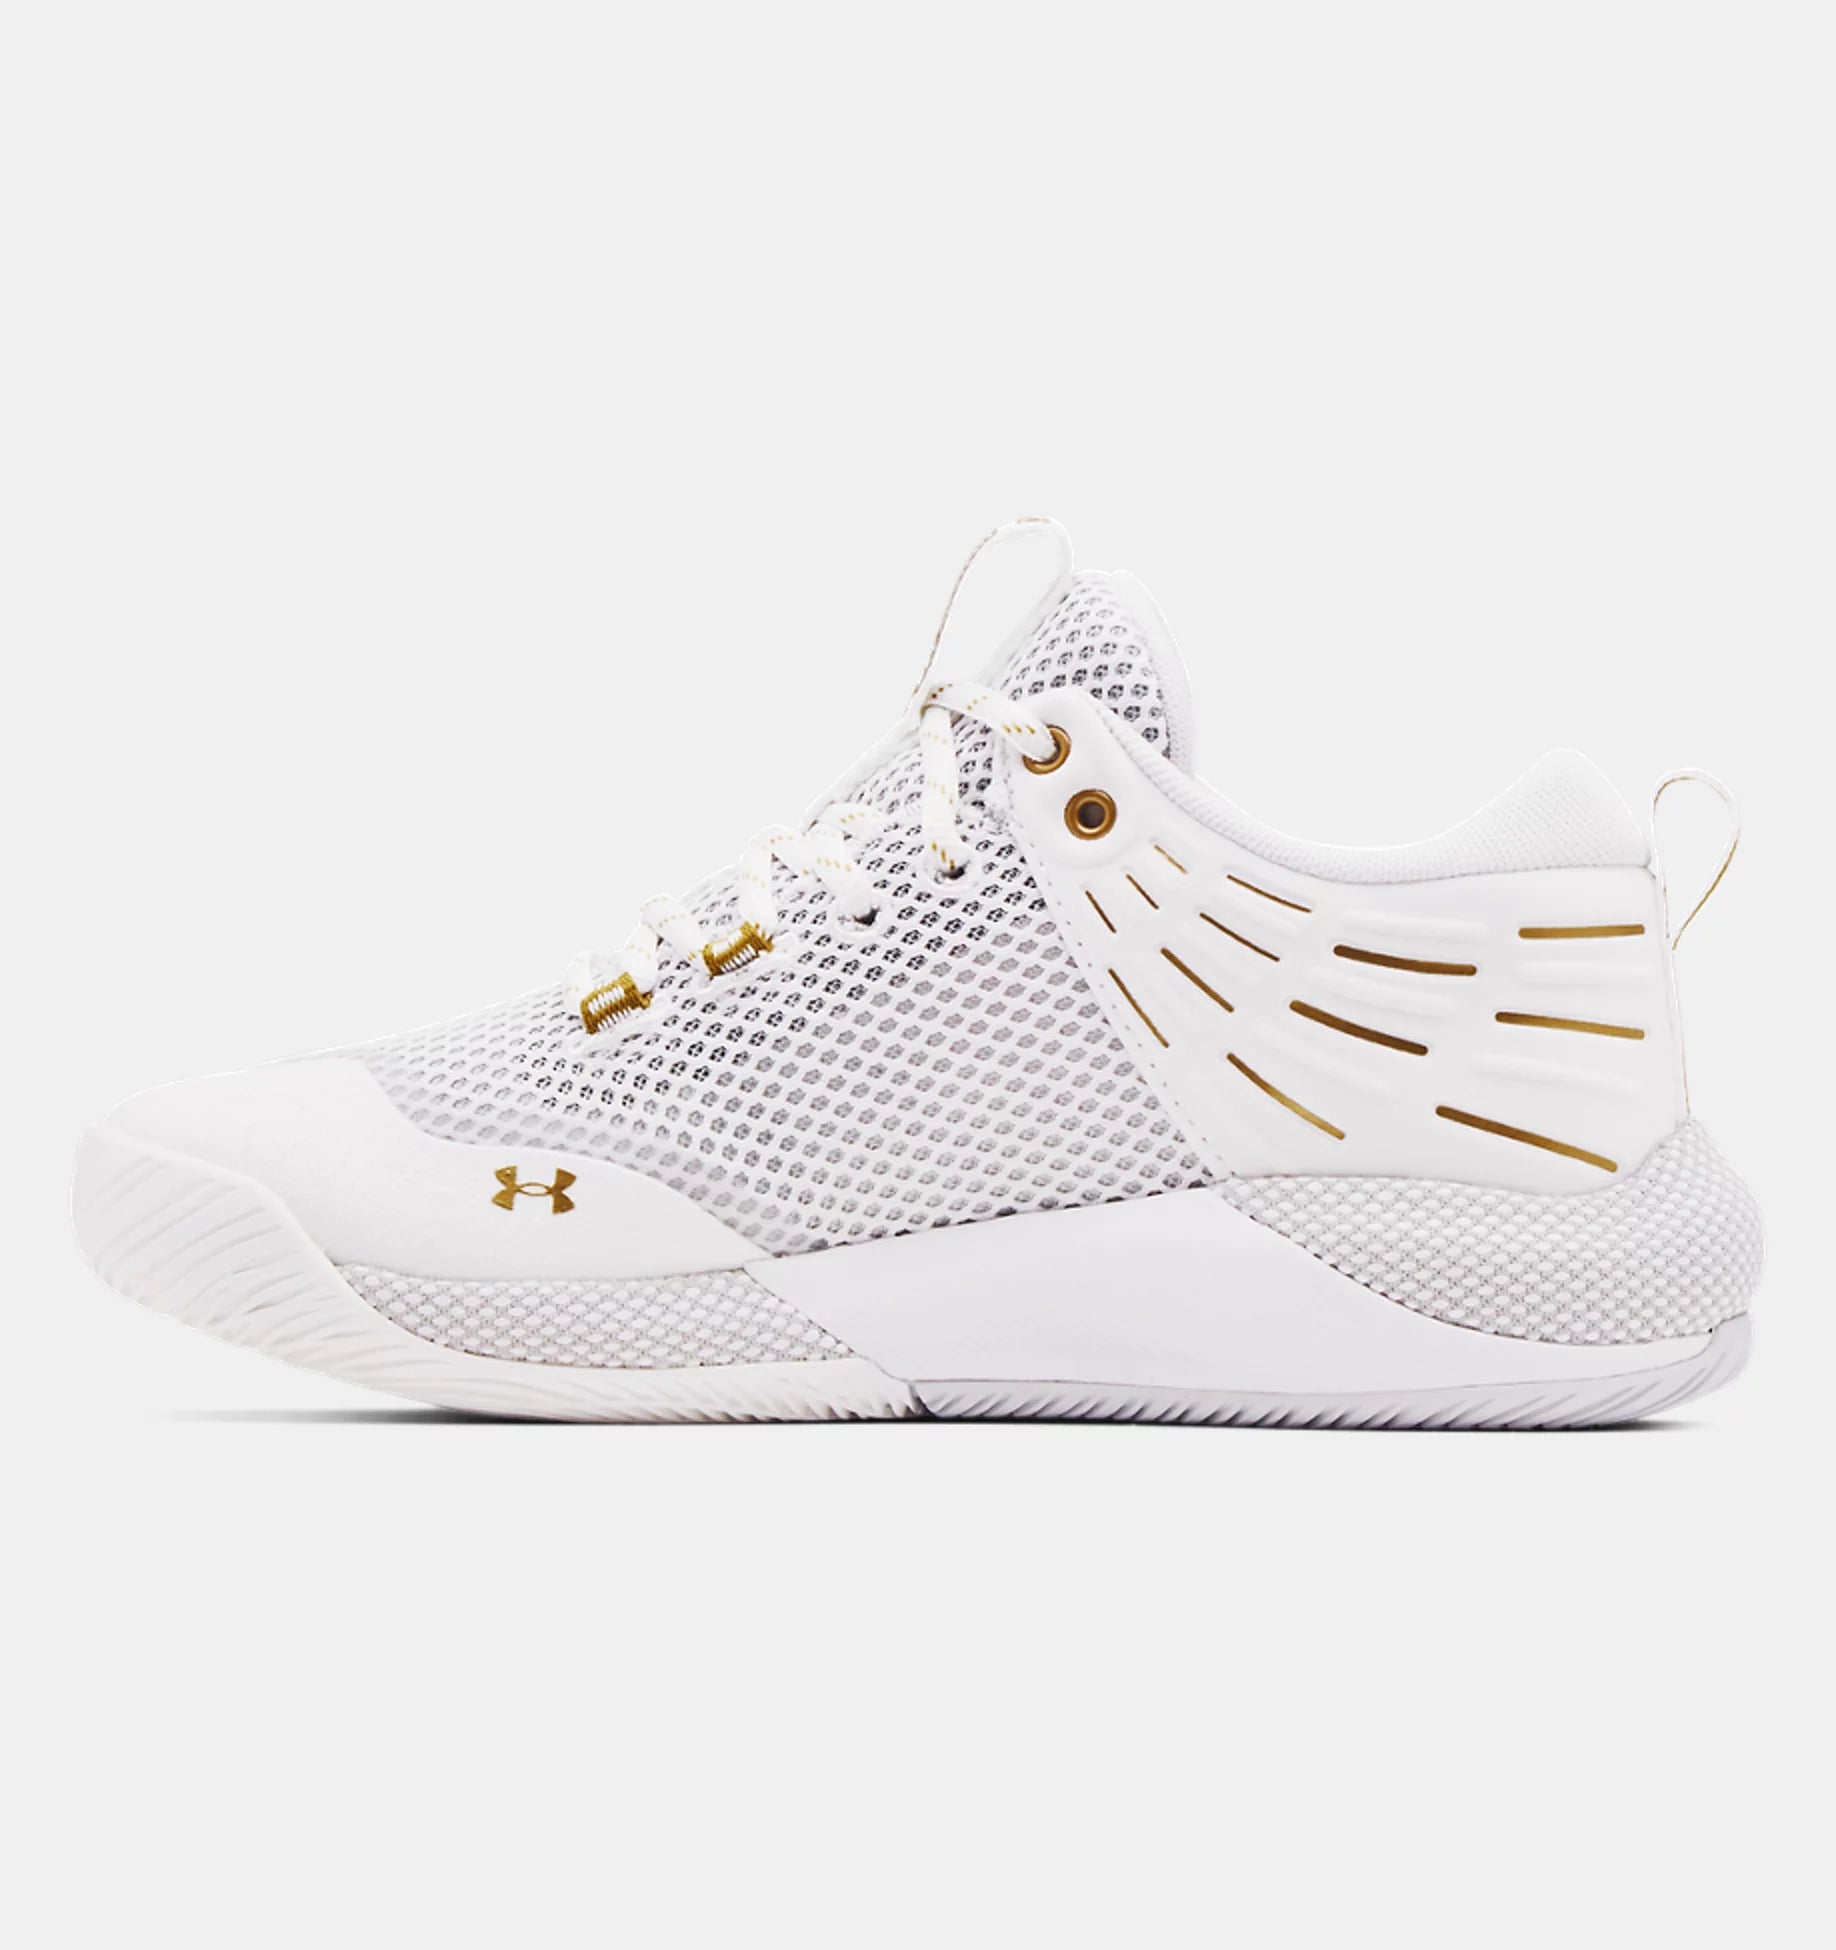 UA-I7 (Under armour womens hovr block city volleyball shoes white/metallic gold) 22398695 UNDER ARMOUR